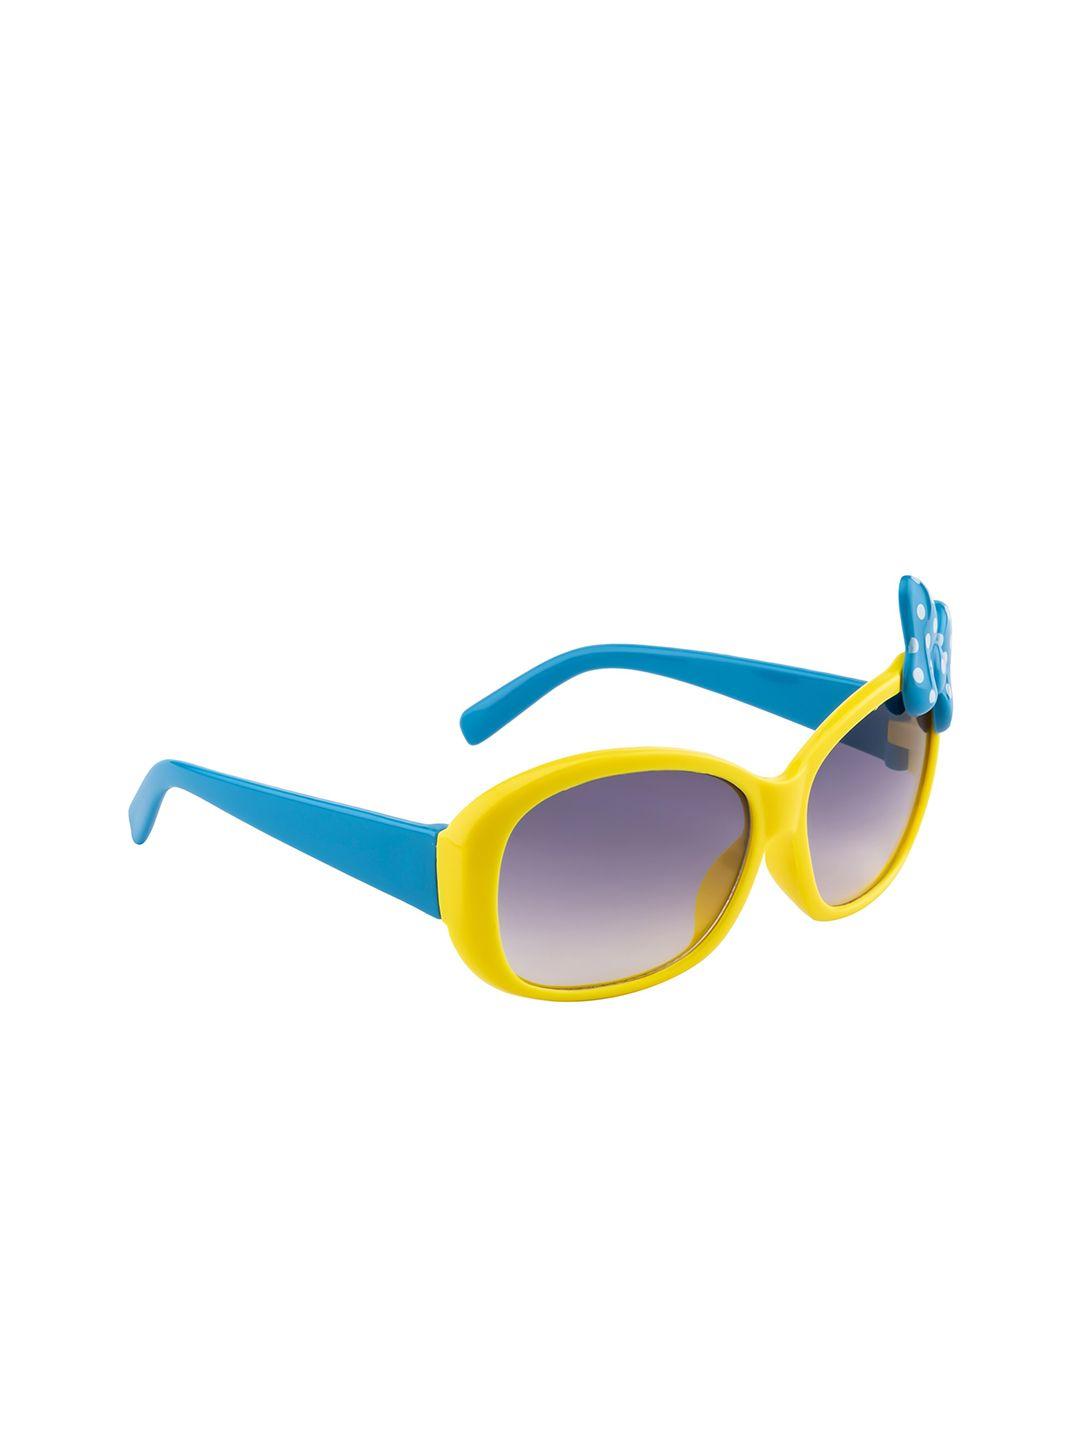 yk unisex kids oval sunglasses with uv protected lens yk-j8153